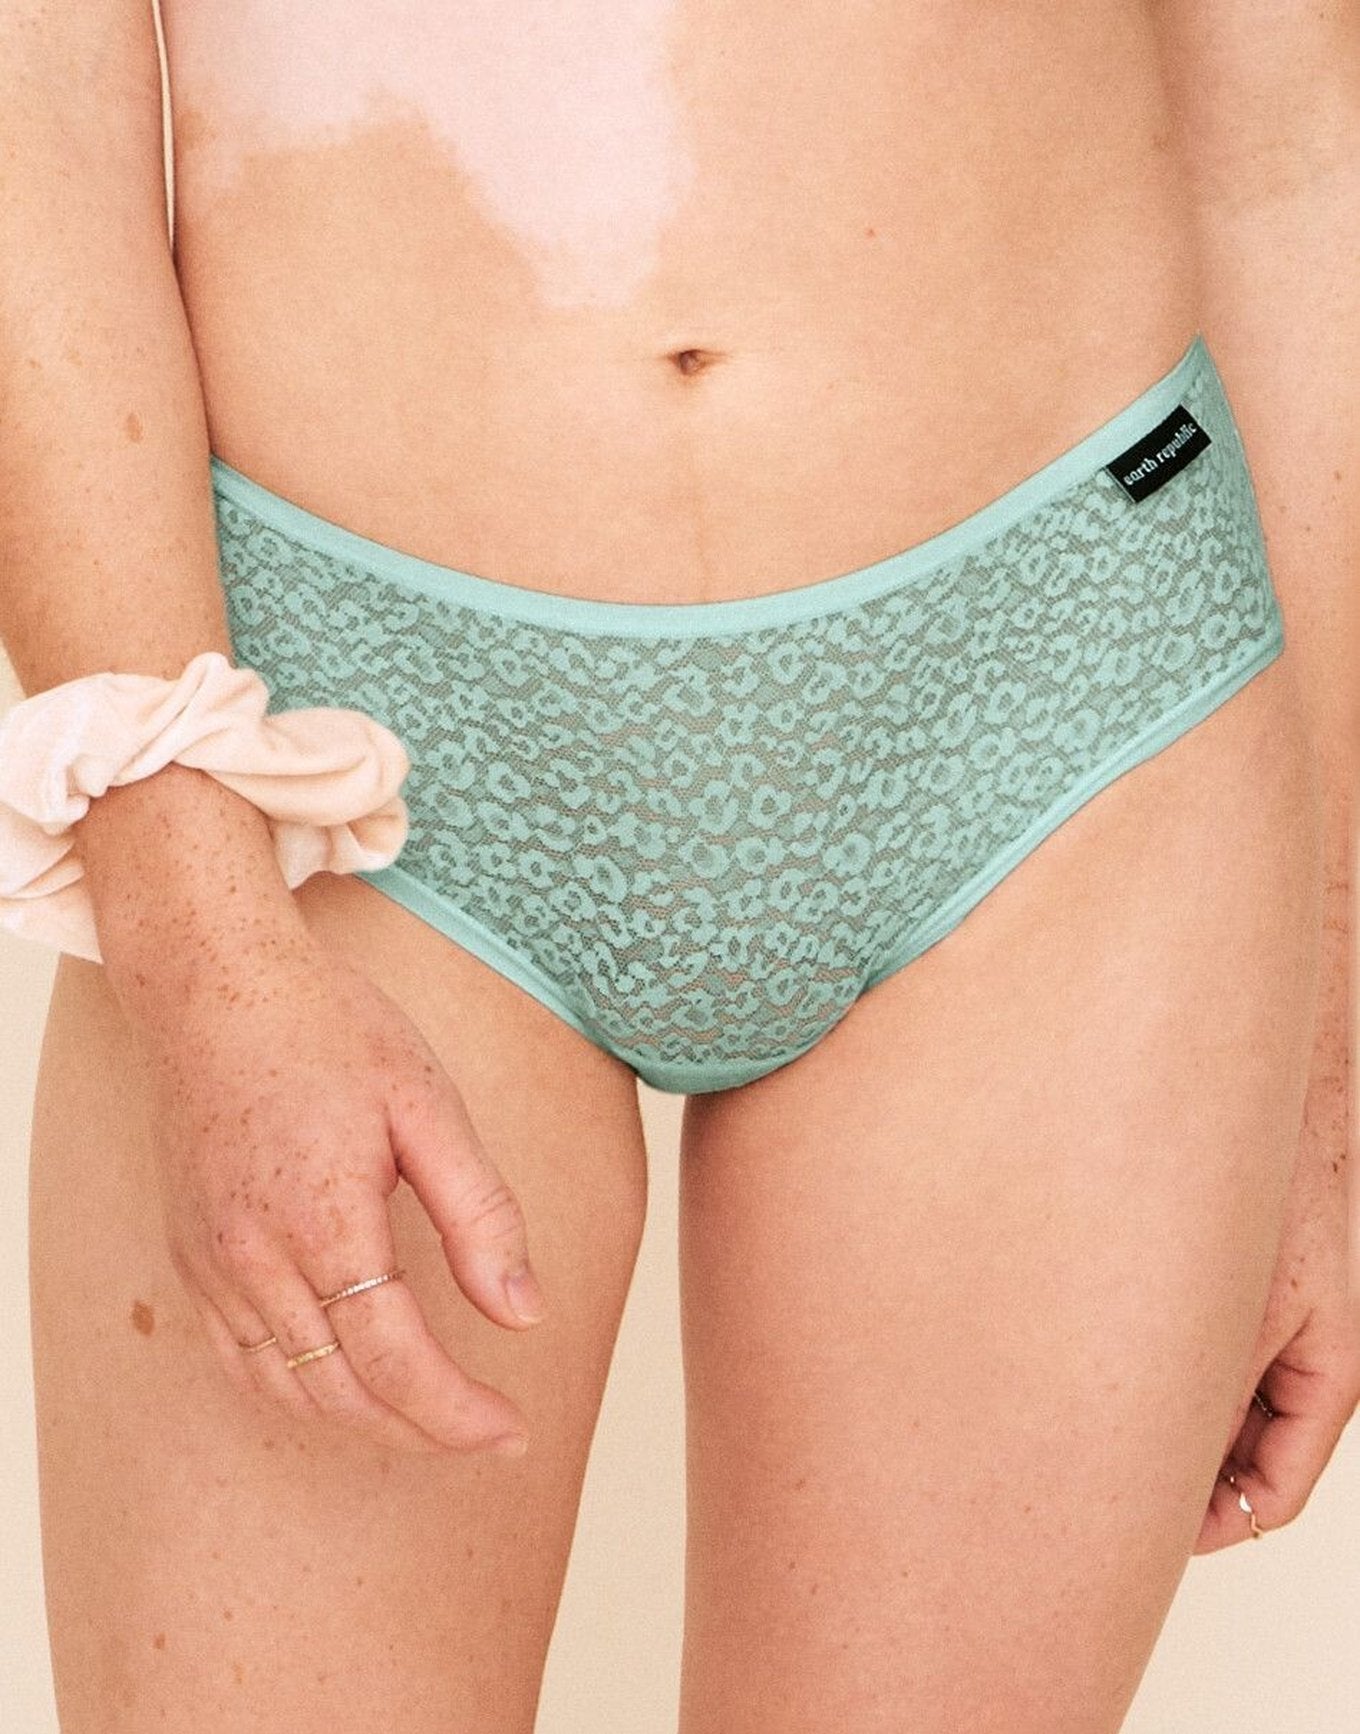 Earth Republic Billie Lace Lace Cheeky in color Bay and shape cheeky